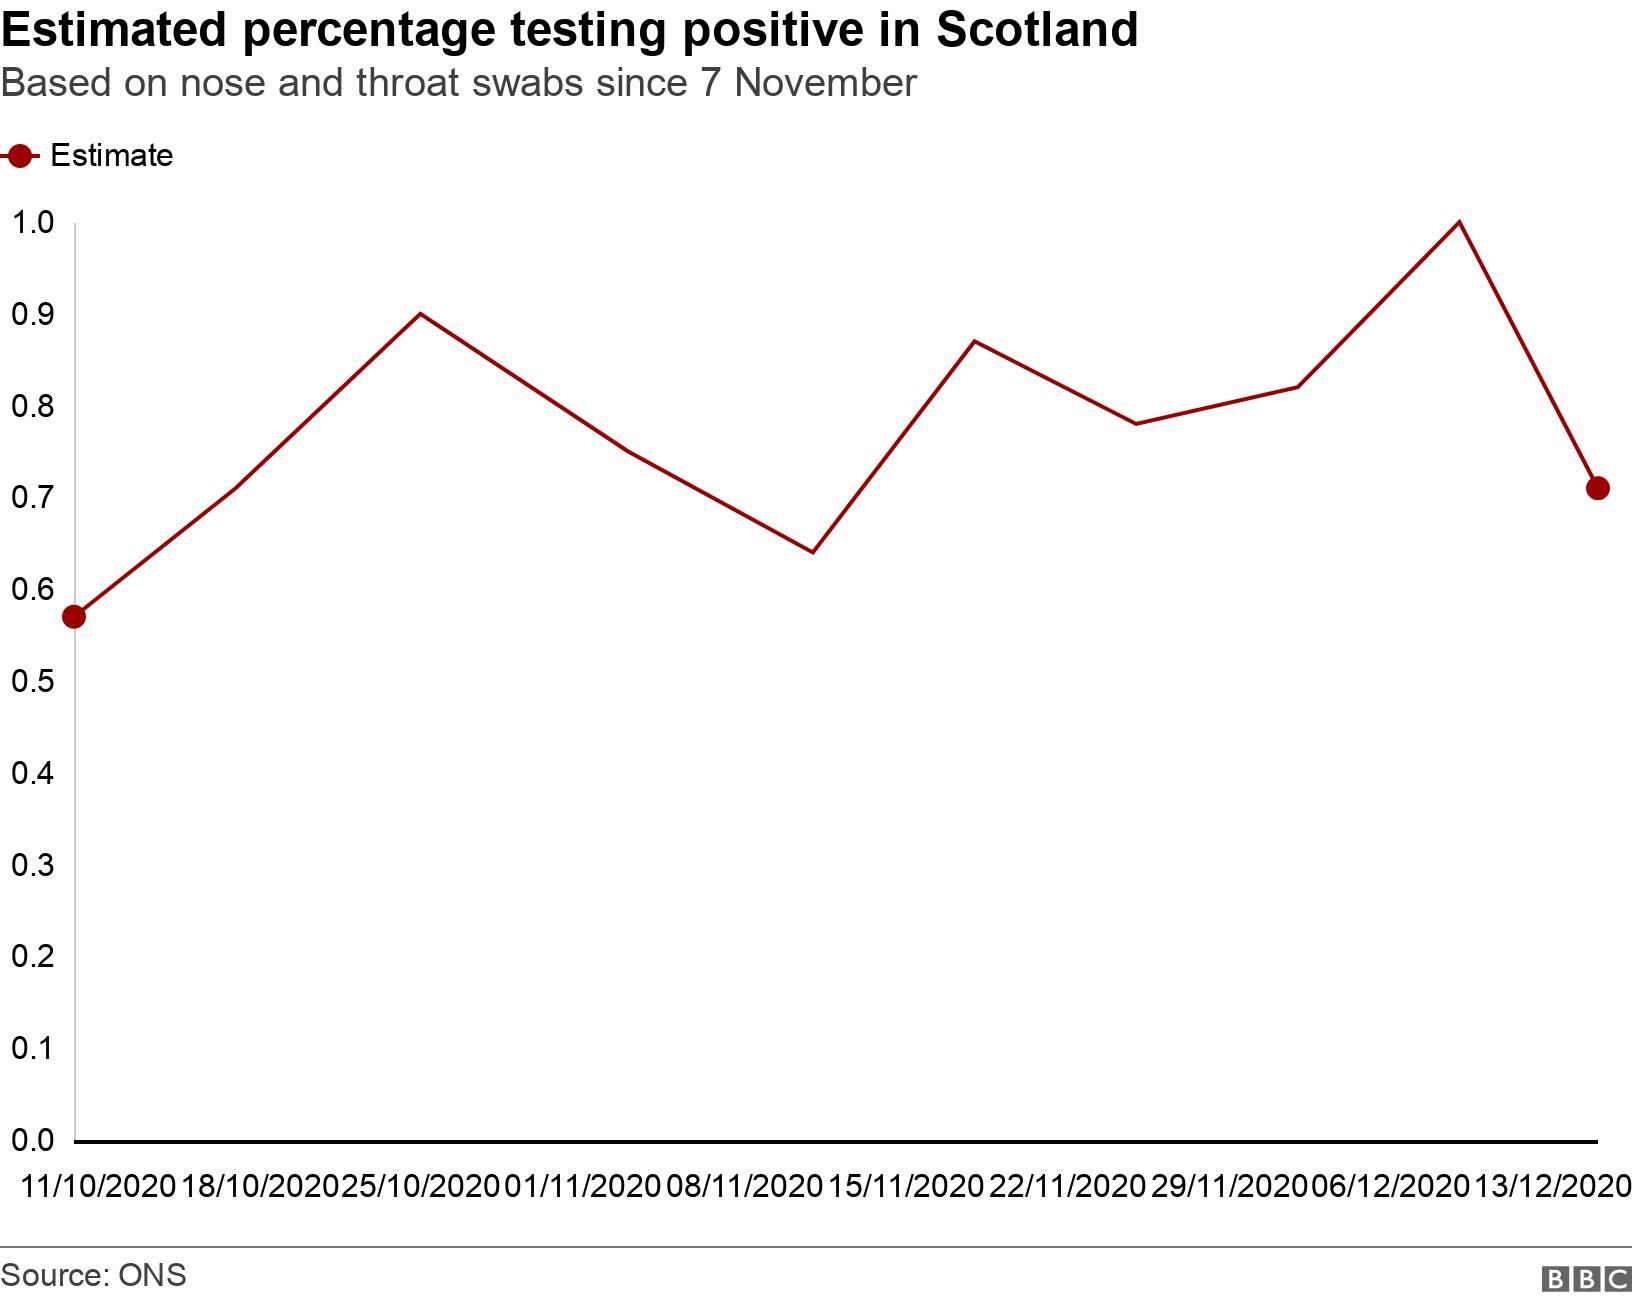 Estimated percentage testing positive in Scotland. Based on nose and throat swabs since 7 November. .